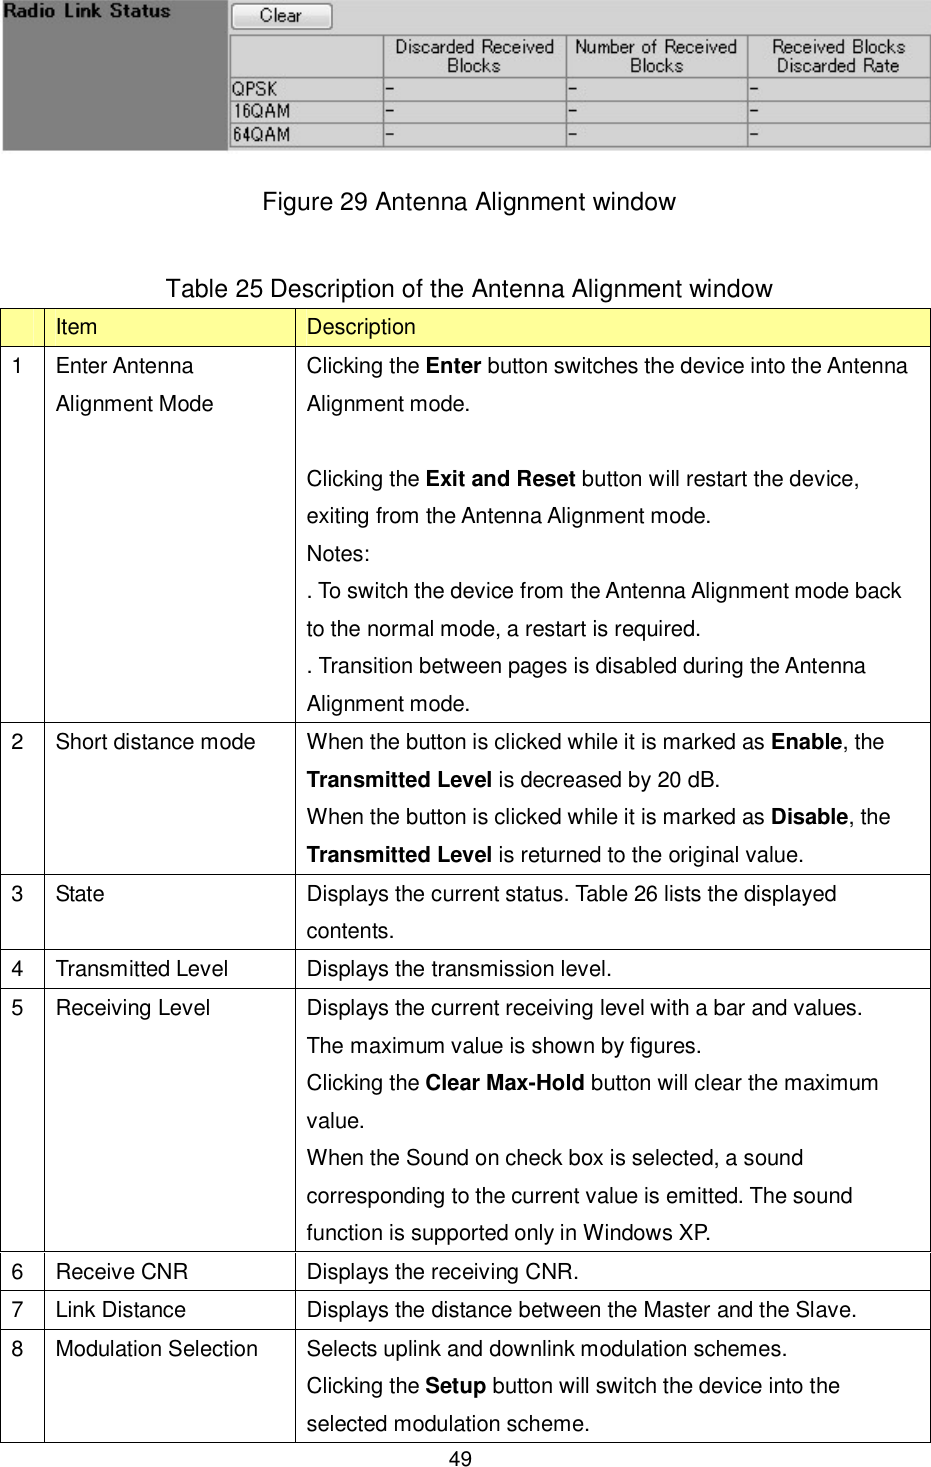    49  Figure 29 Antenna Alignment window  Table 25 Description of the Antenna Alignment window   Item  Description 1  Enter Antenna Alignment Mode Clicking the Enter button switches the device into the Antenna Alignment mode.  Clicking the Exit and Reset button will restart the device, exiting from the Antenna Alignment mode. Notes: . To switch the device from the Antenna Alignment mode back to the normal mode, a restart is required. . Transition between pages is disabled during the Antenna Alignment mode.   2  Short distance mode  When the button is clicked while it is marked as Enable, the Transmitted Level is decreased by 20 dB.   When the button is clicked while it is marked as Disable, the Transmitted Level is returned to the original value. 3  State  Displays the current status. Table 26 lists the displayed contents. 4  Transmitted Level  Displays the transmission level. 5  Receiving Level  Displays the current receiving level with a bar and values. The maximum value is shown by figures. Clicking the Clear Max-Hold button will clear the maximum value. When the Sound on check box is selected, a sound corresponding to the current value is emitted. The sound function is supported only in Windows XP. 6  Receive CNR  Displays the receiving CNR. 7  Link Distance  Displays the distance between the Master and the Slave. 8  Modulation Selection  Selects uplink and downlink modulation schemes. Clicking the Setup button will switch the device into the selected modulation scheme. 